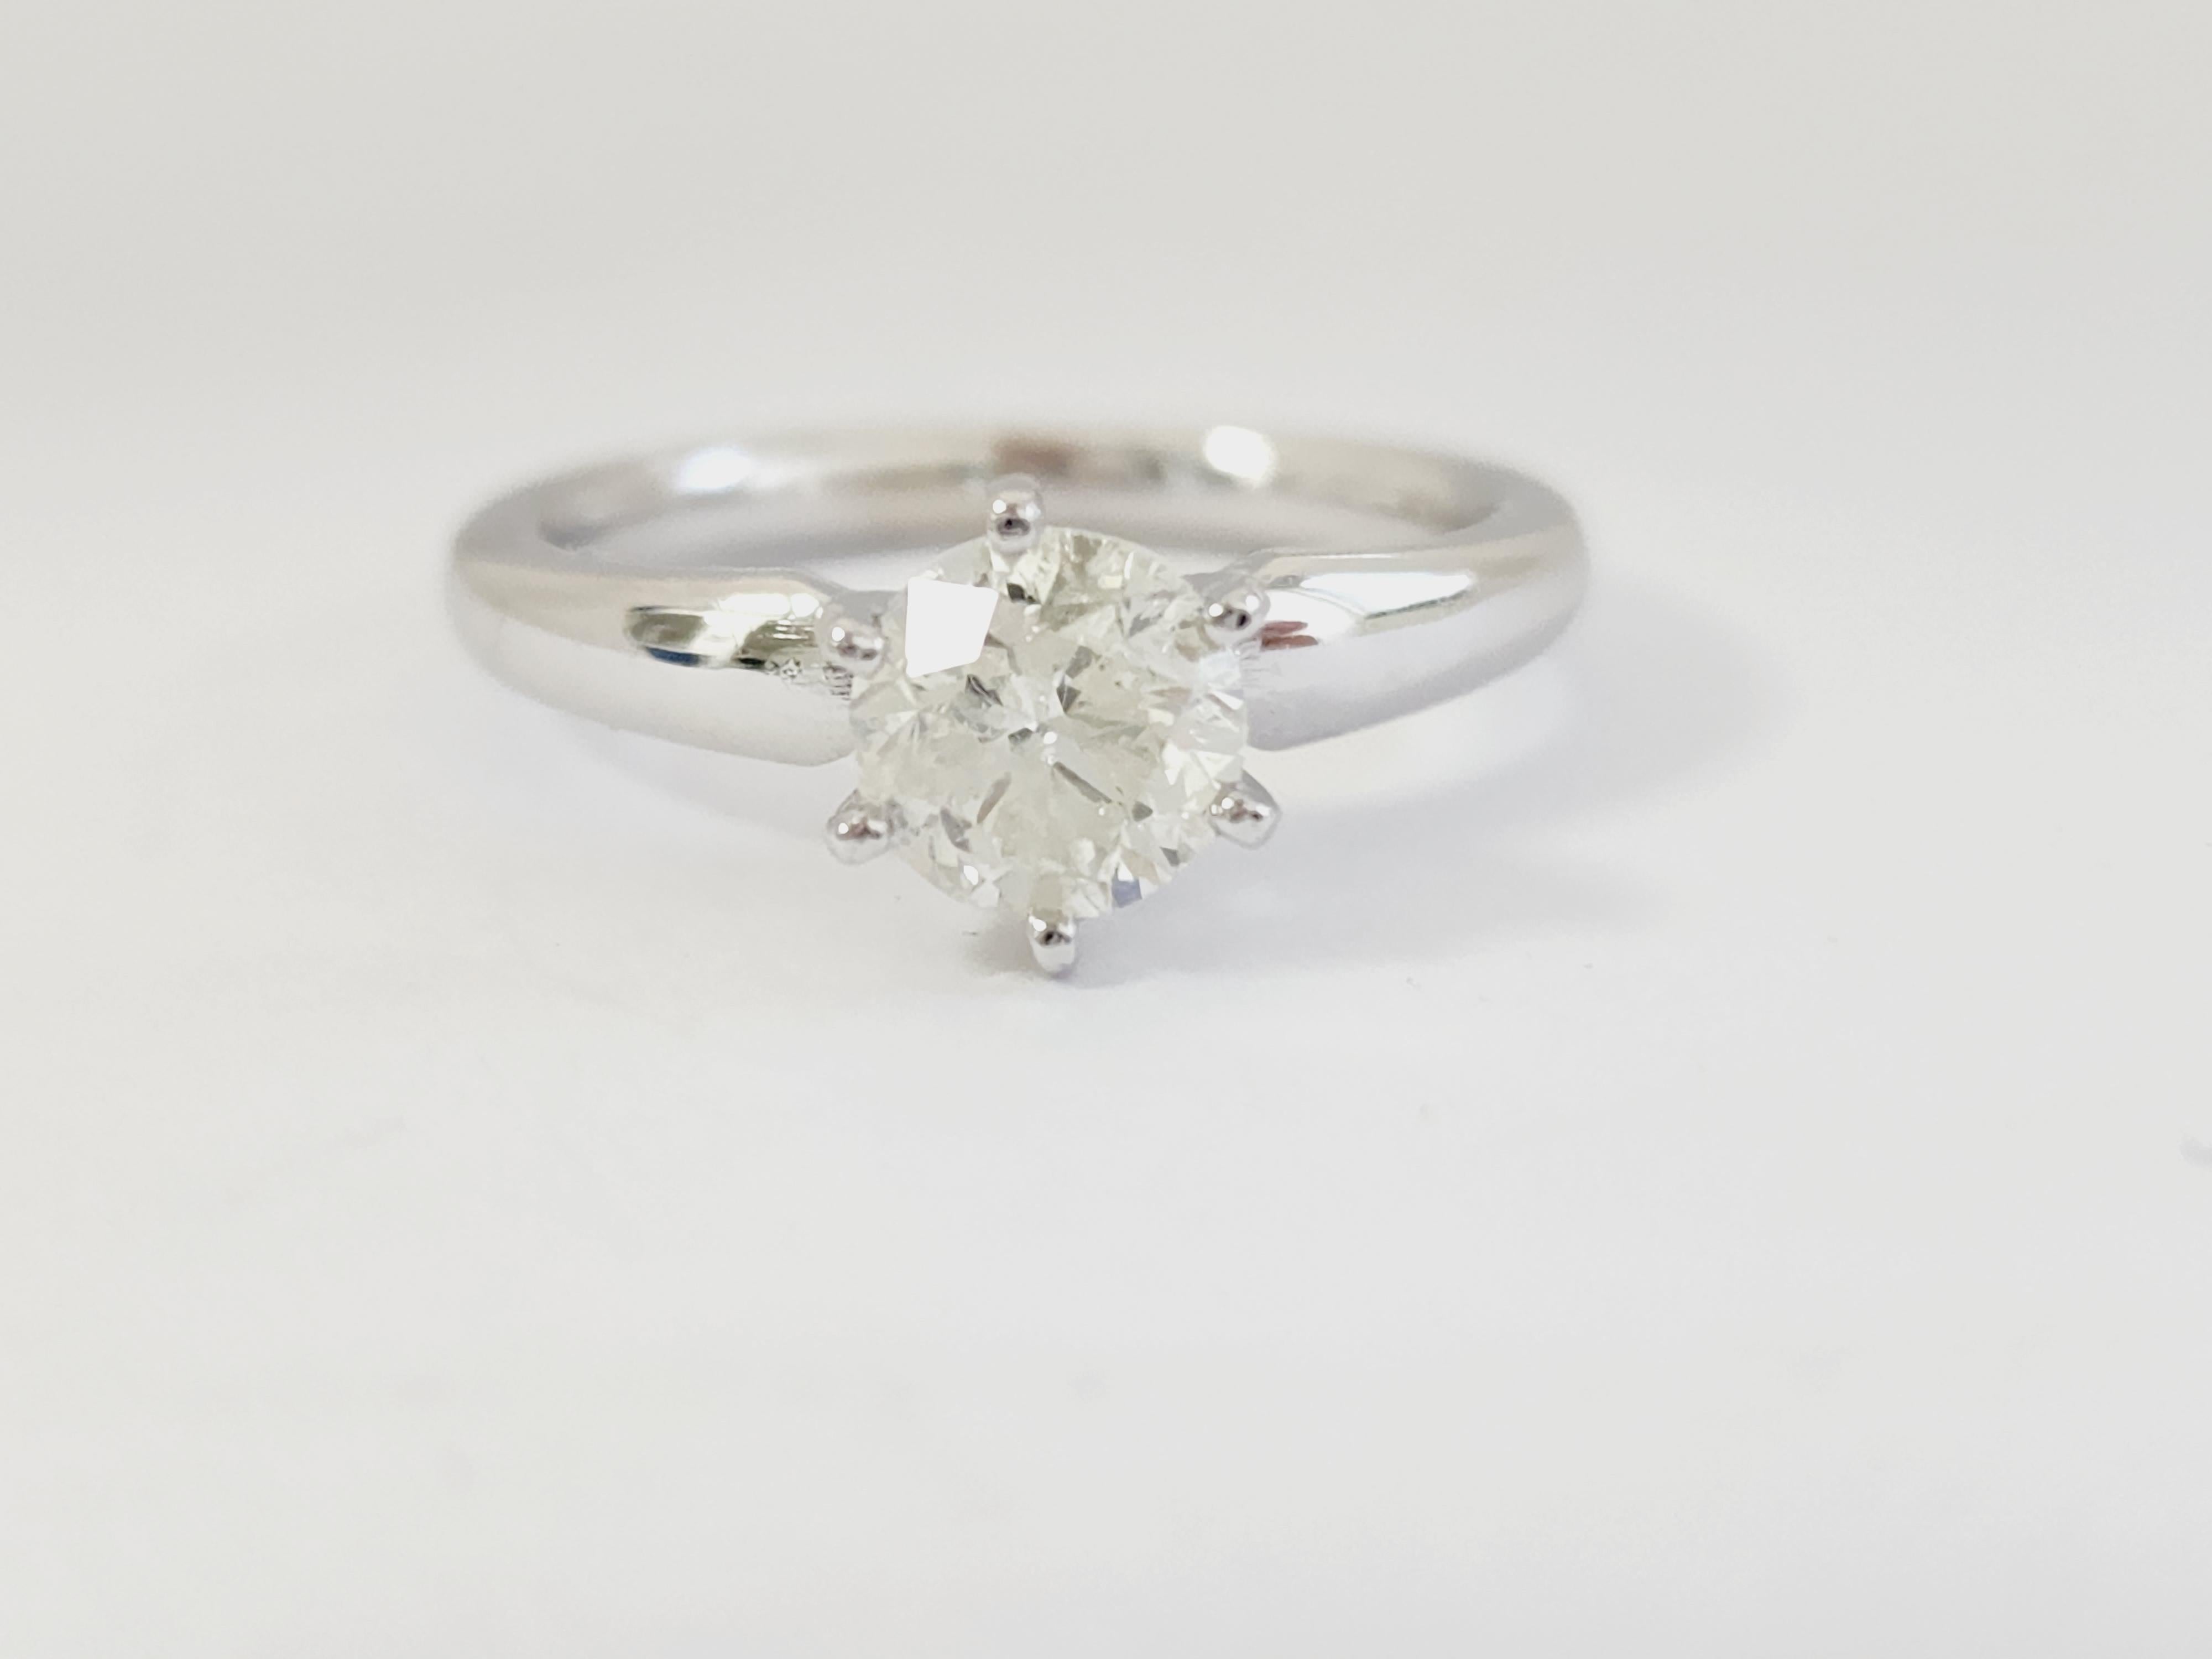 GIA 1.12 ct round brilliant cut natural diamonds. 6 prong solitaire setting, set in 14k white gold. Ring Size 6.75.